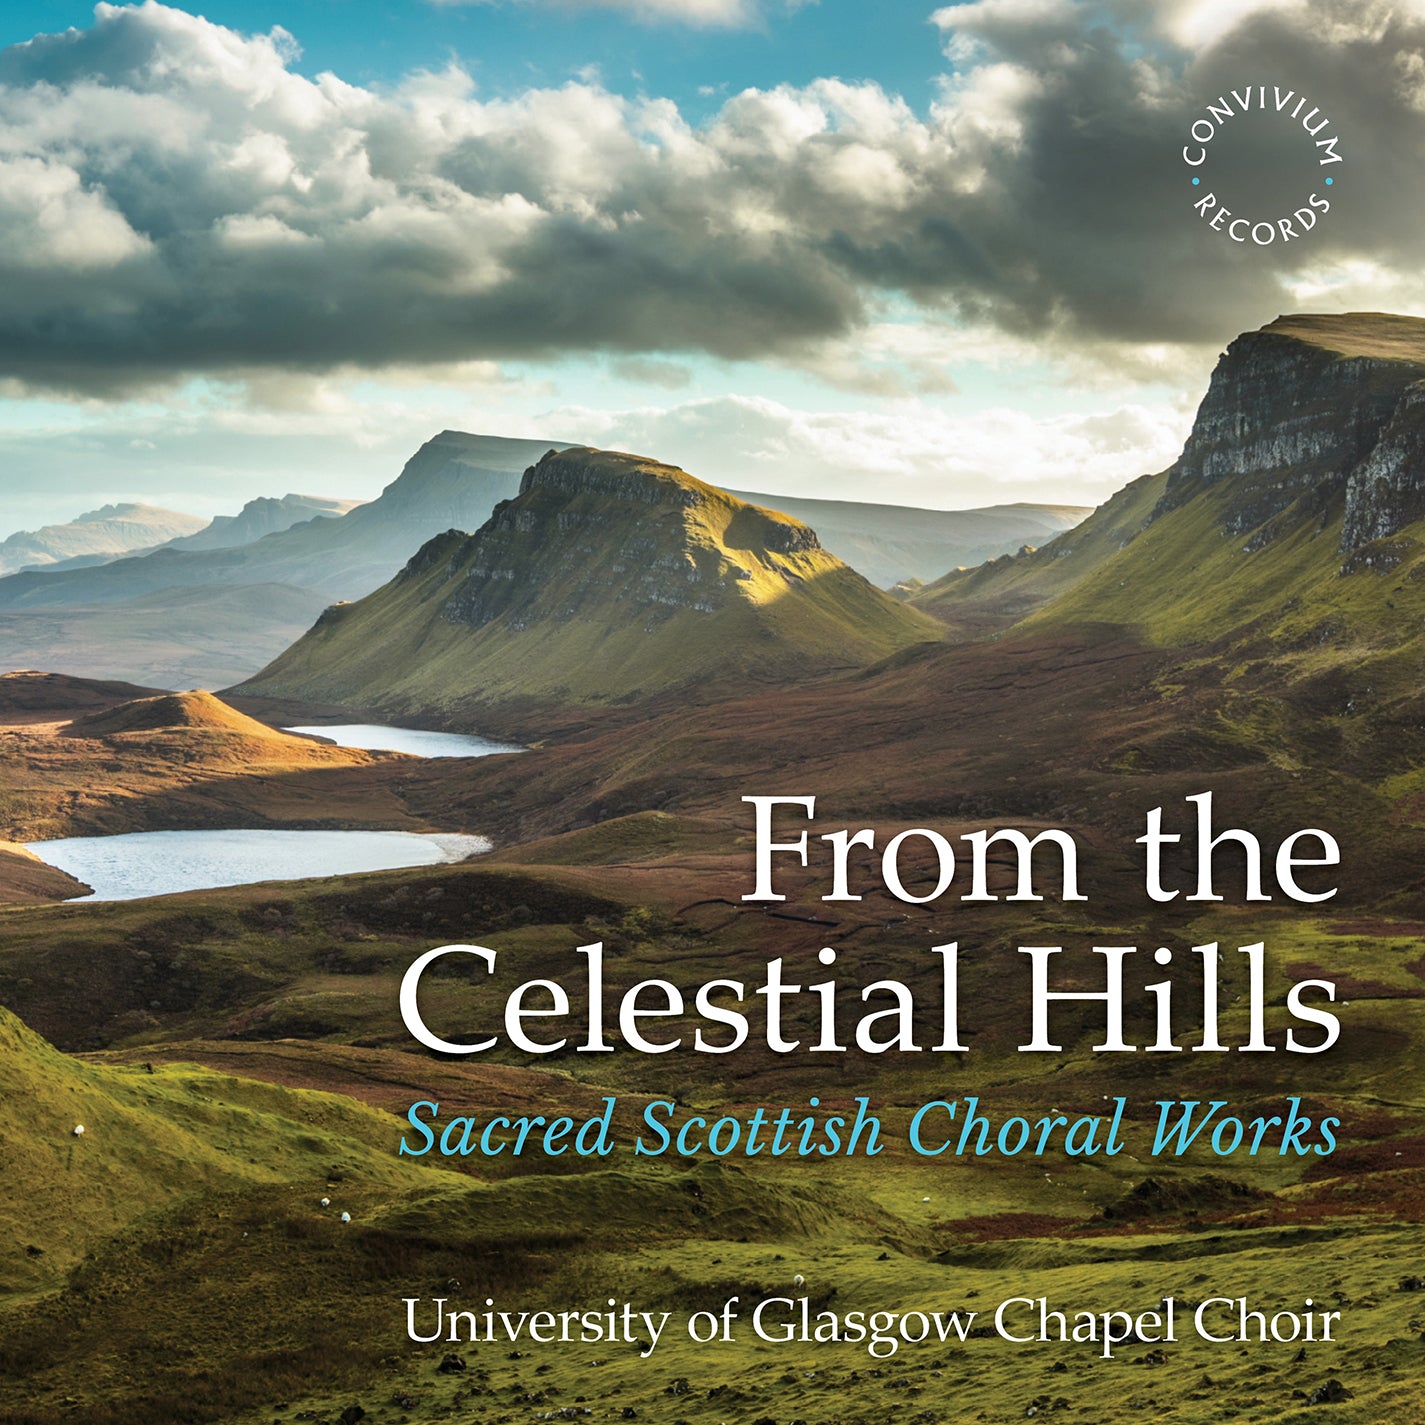 From the Celestial Hills - Sacred Scottish Choral Works